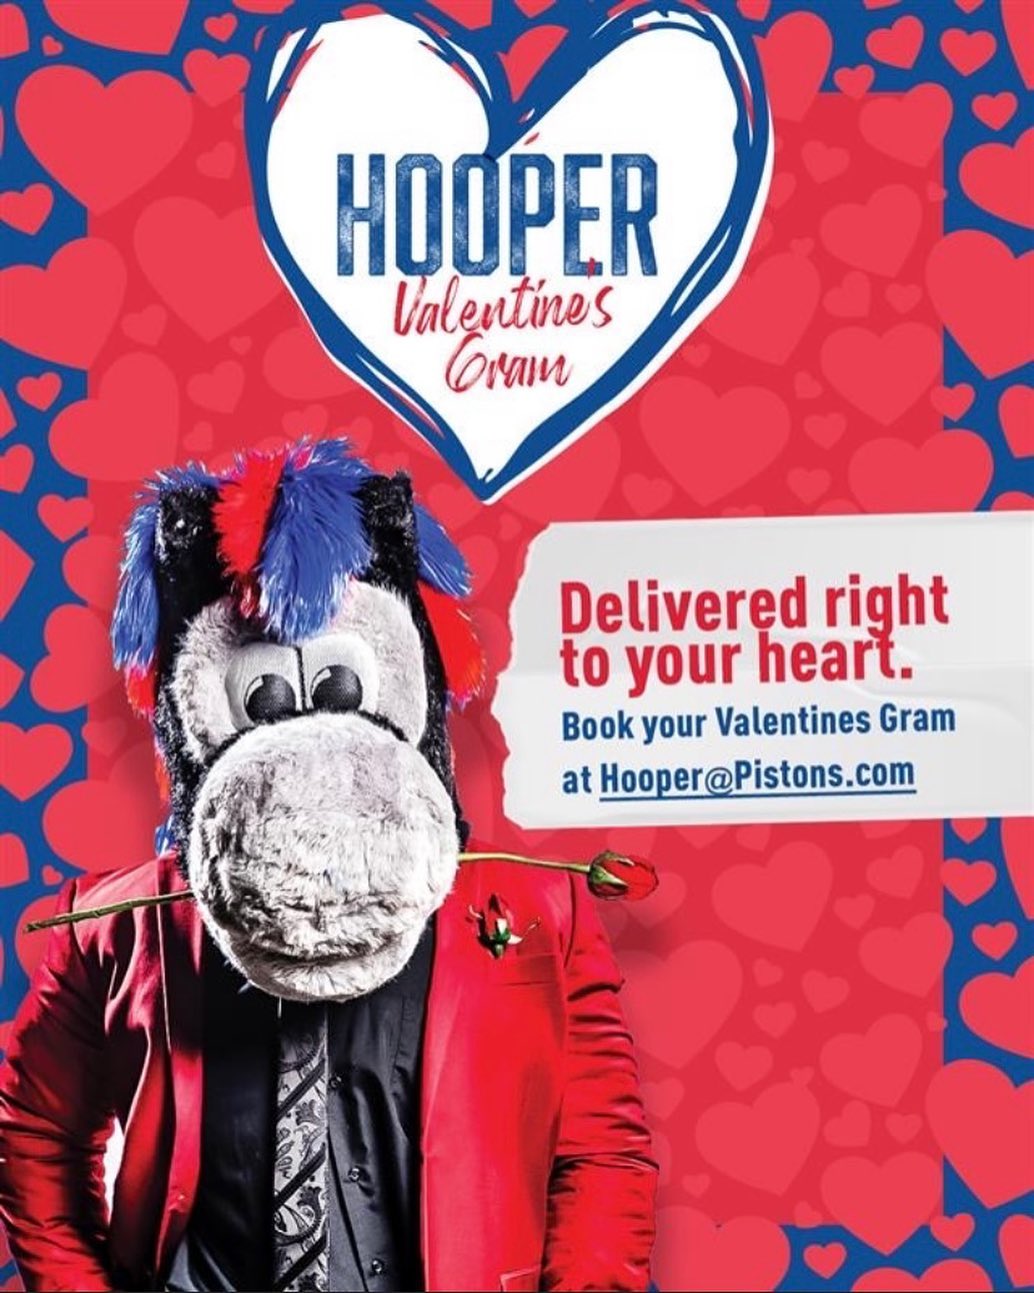 Roses are red,
Violets are blue,
Send a Hooper Valentines Gram,
To a loved one f...